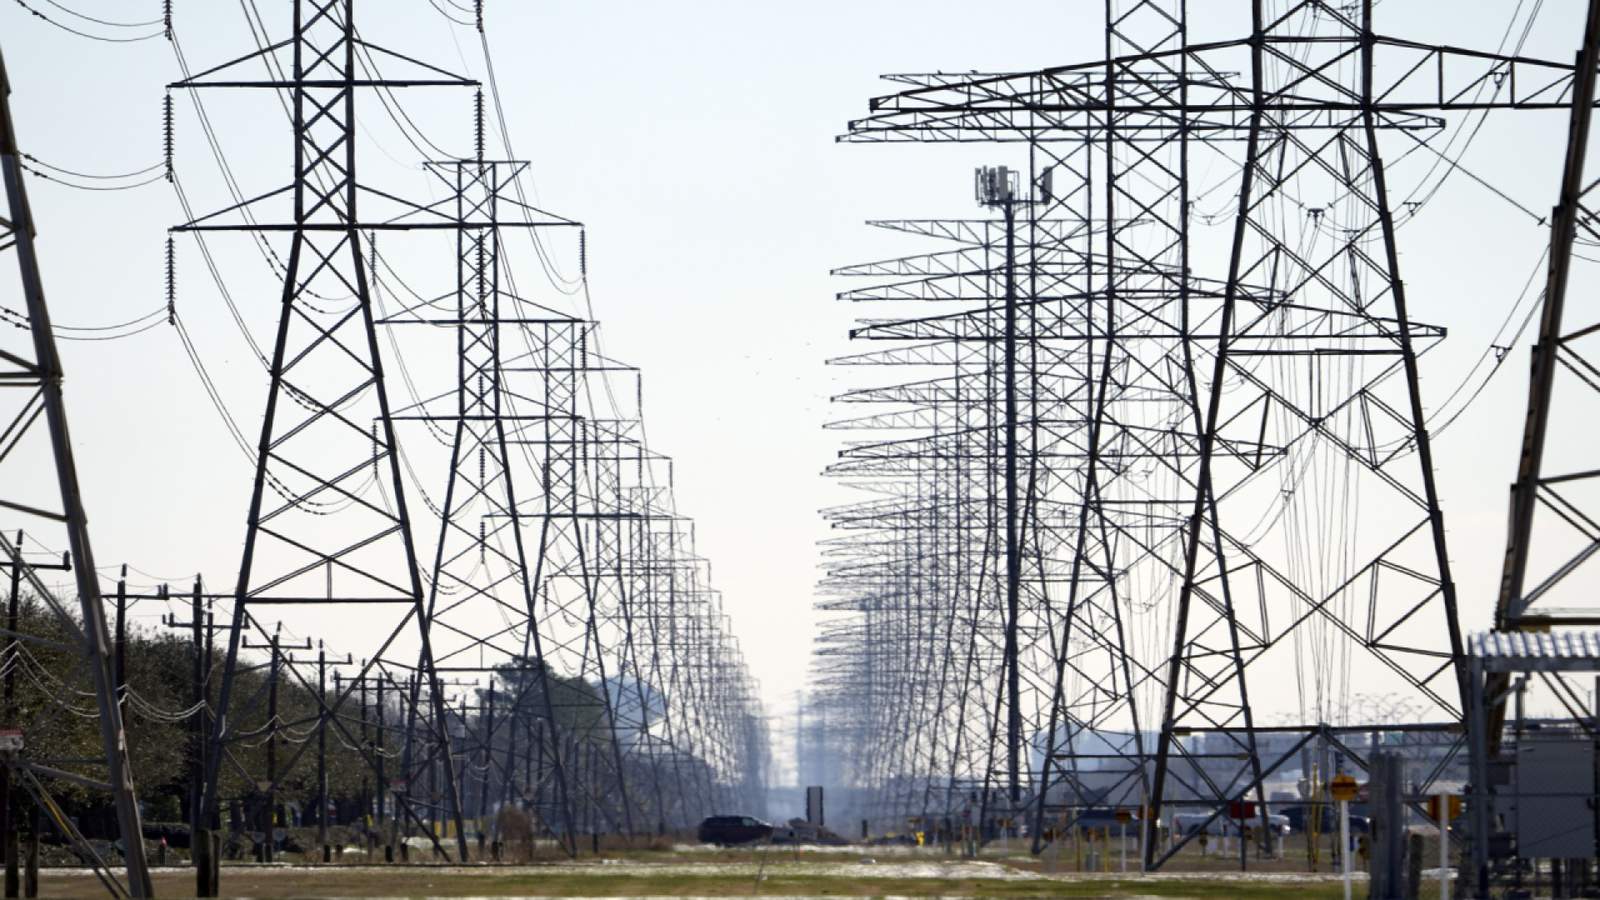 CPS Energy sues ERCOT over exorbitant energy prices during Texas winter storm